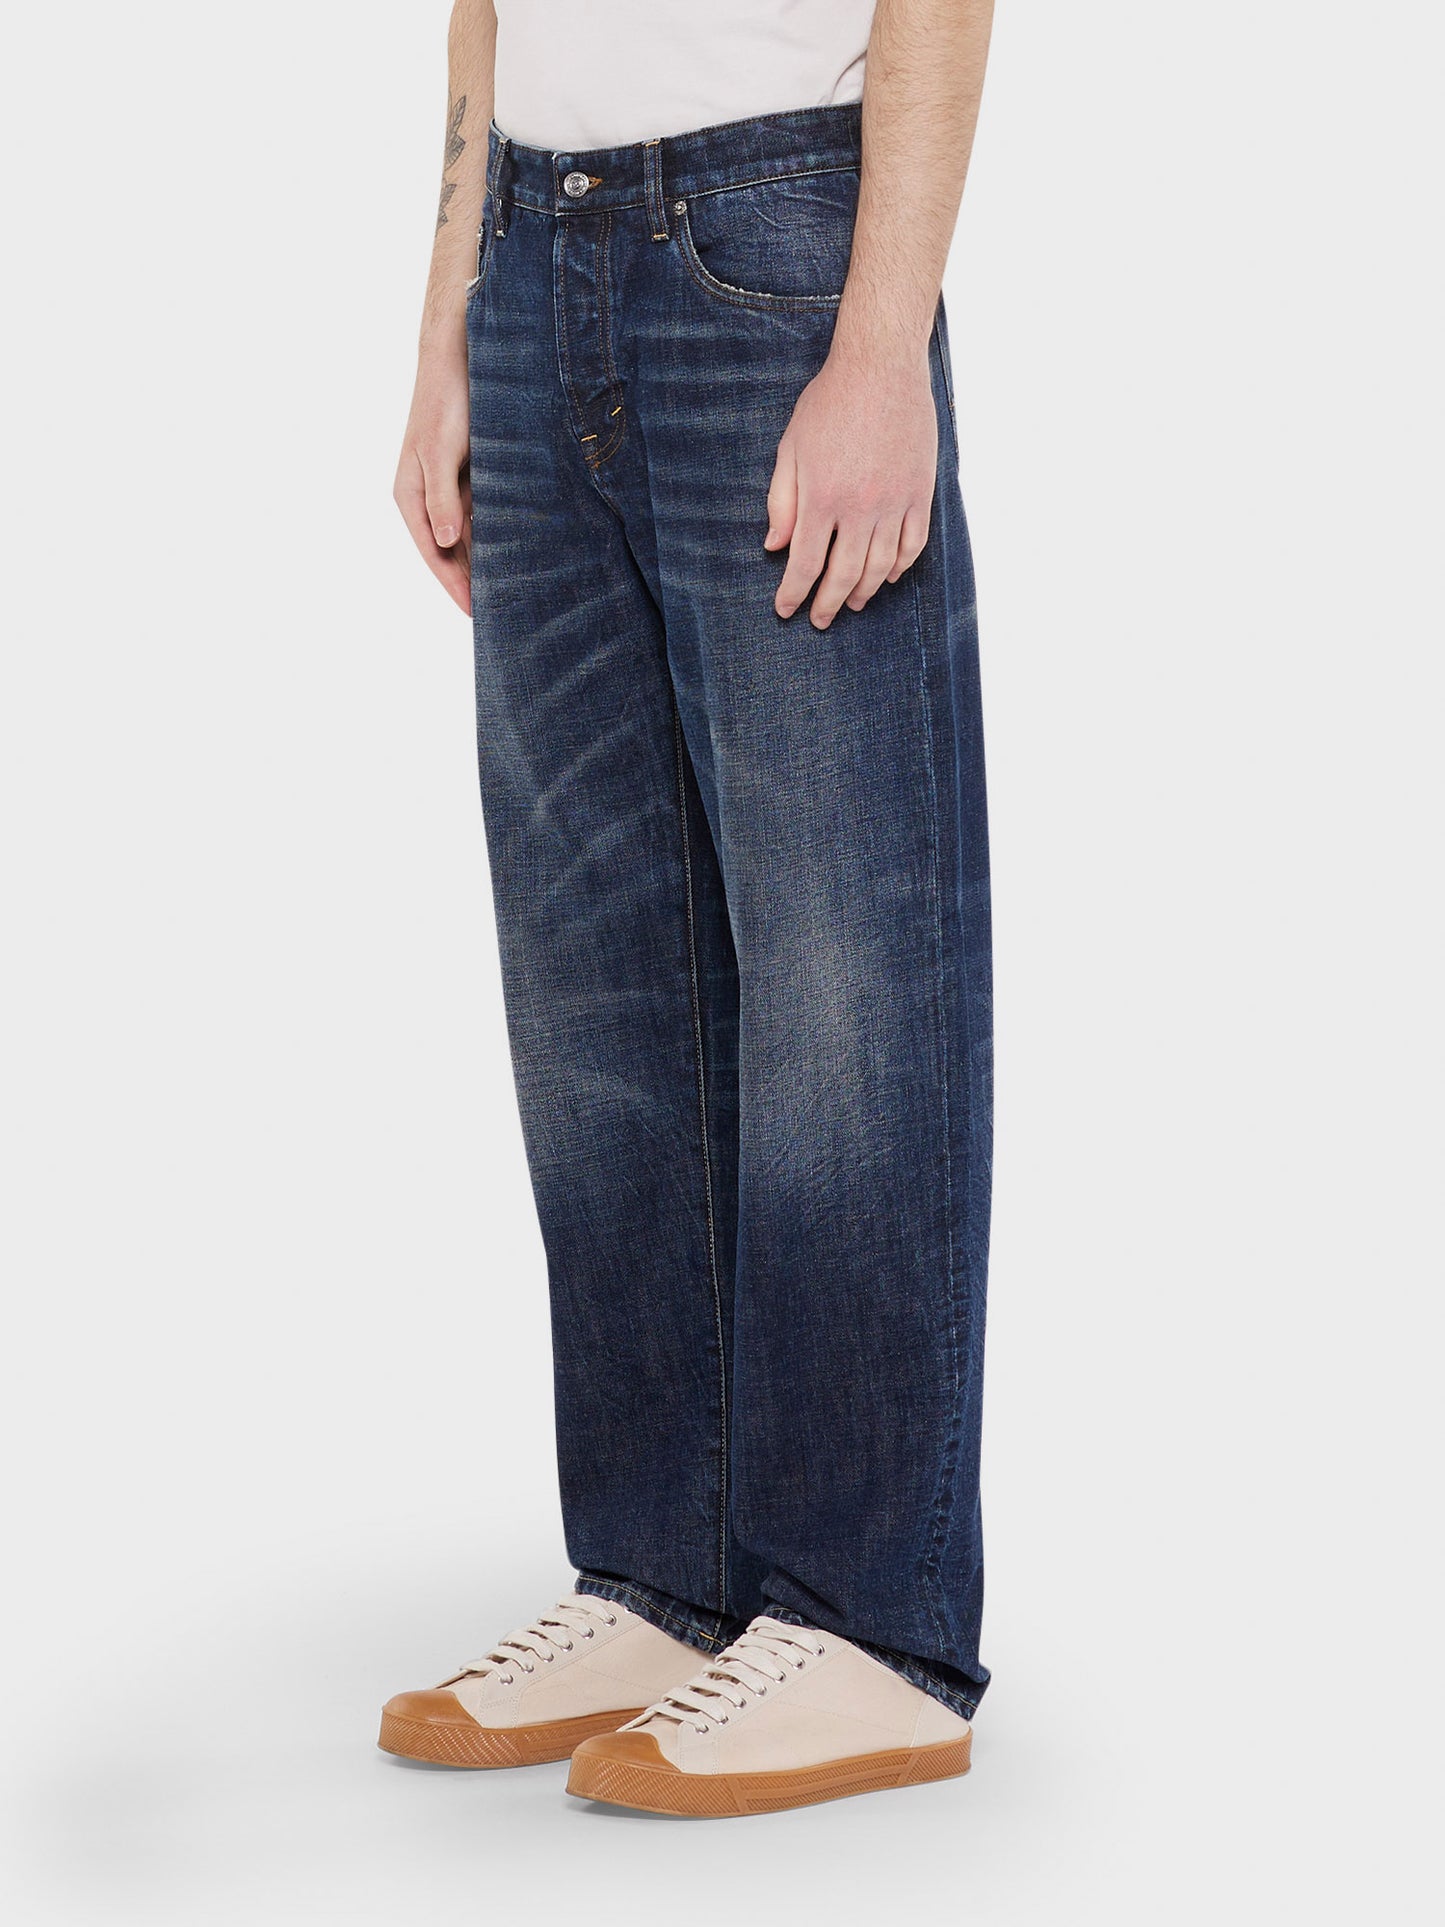 Newman relaxed-fit jeans